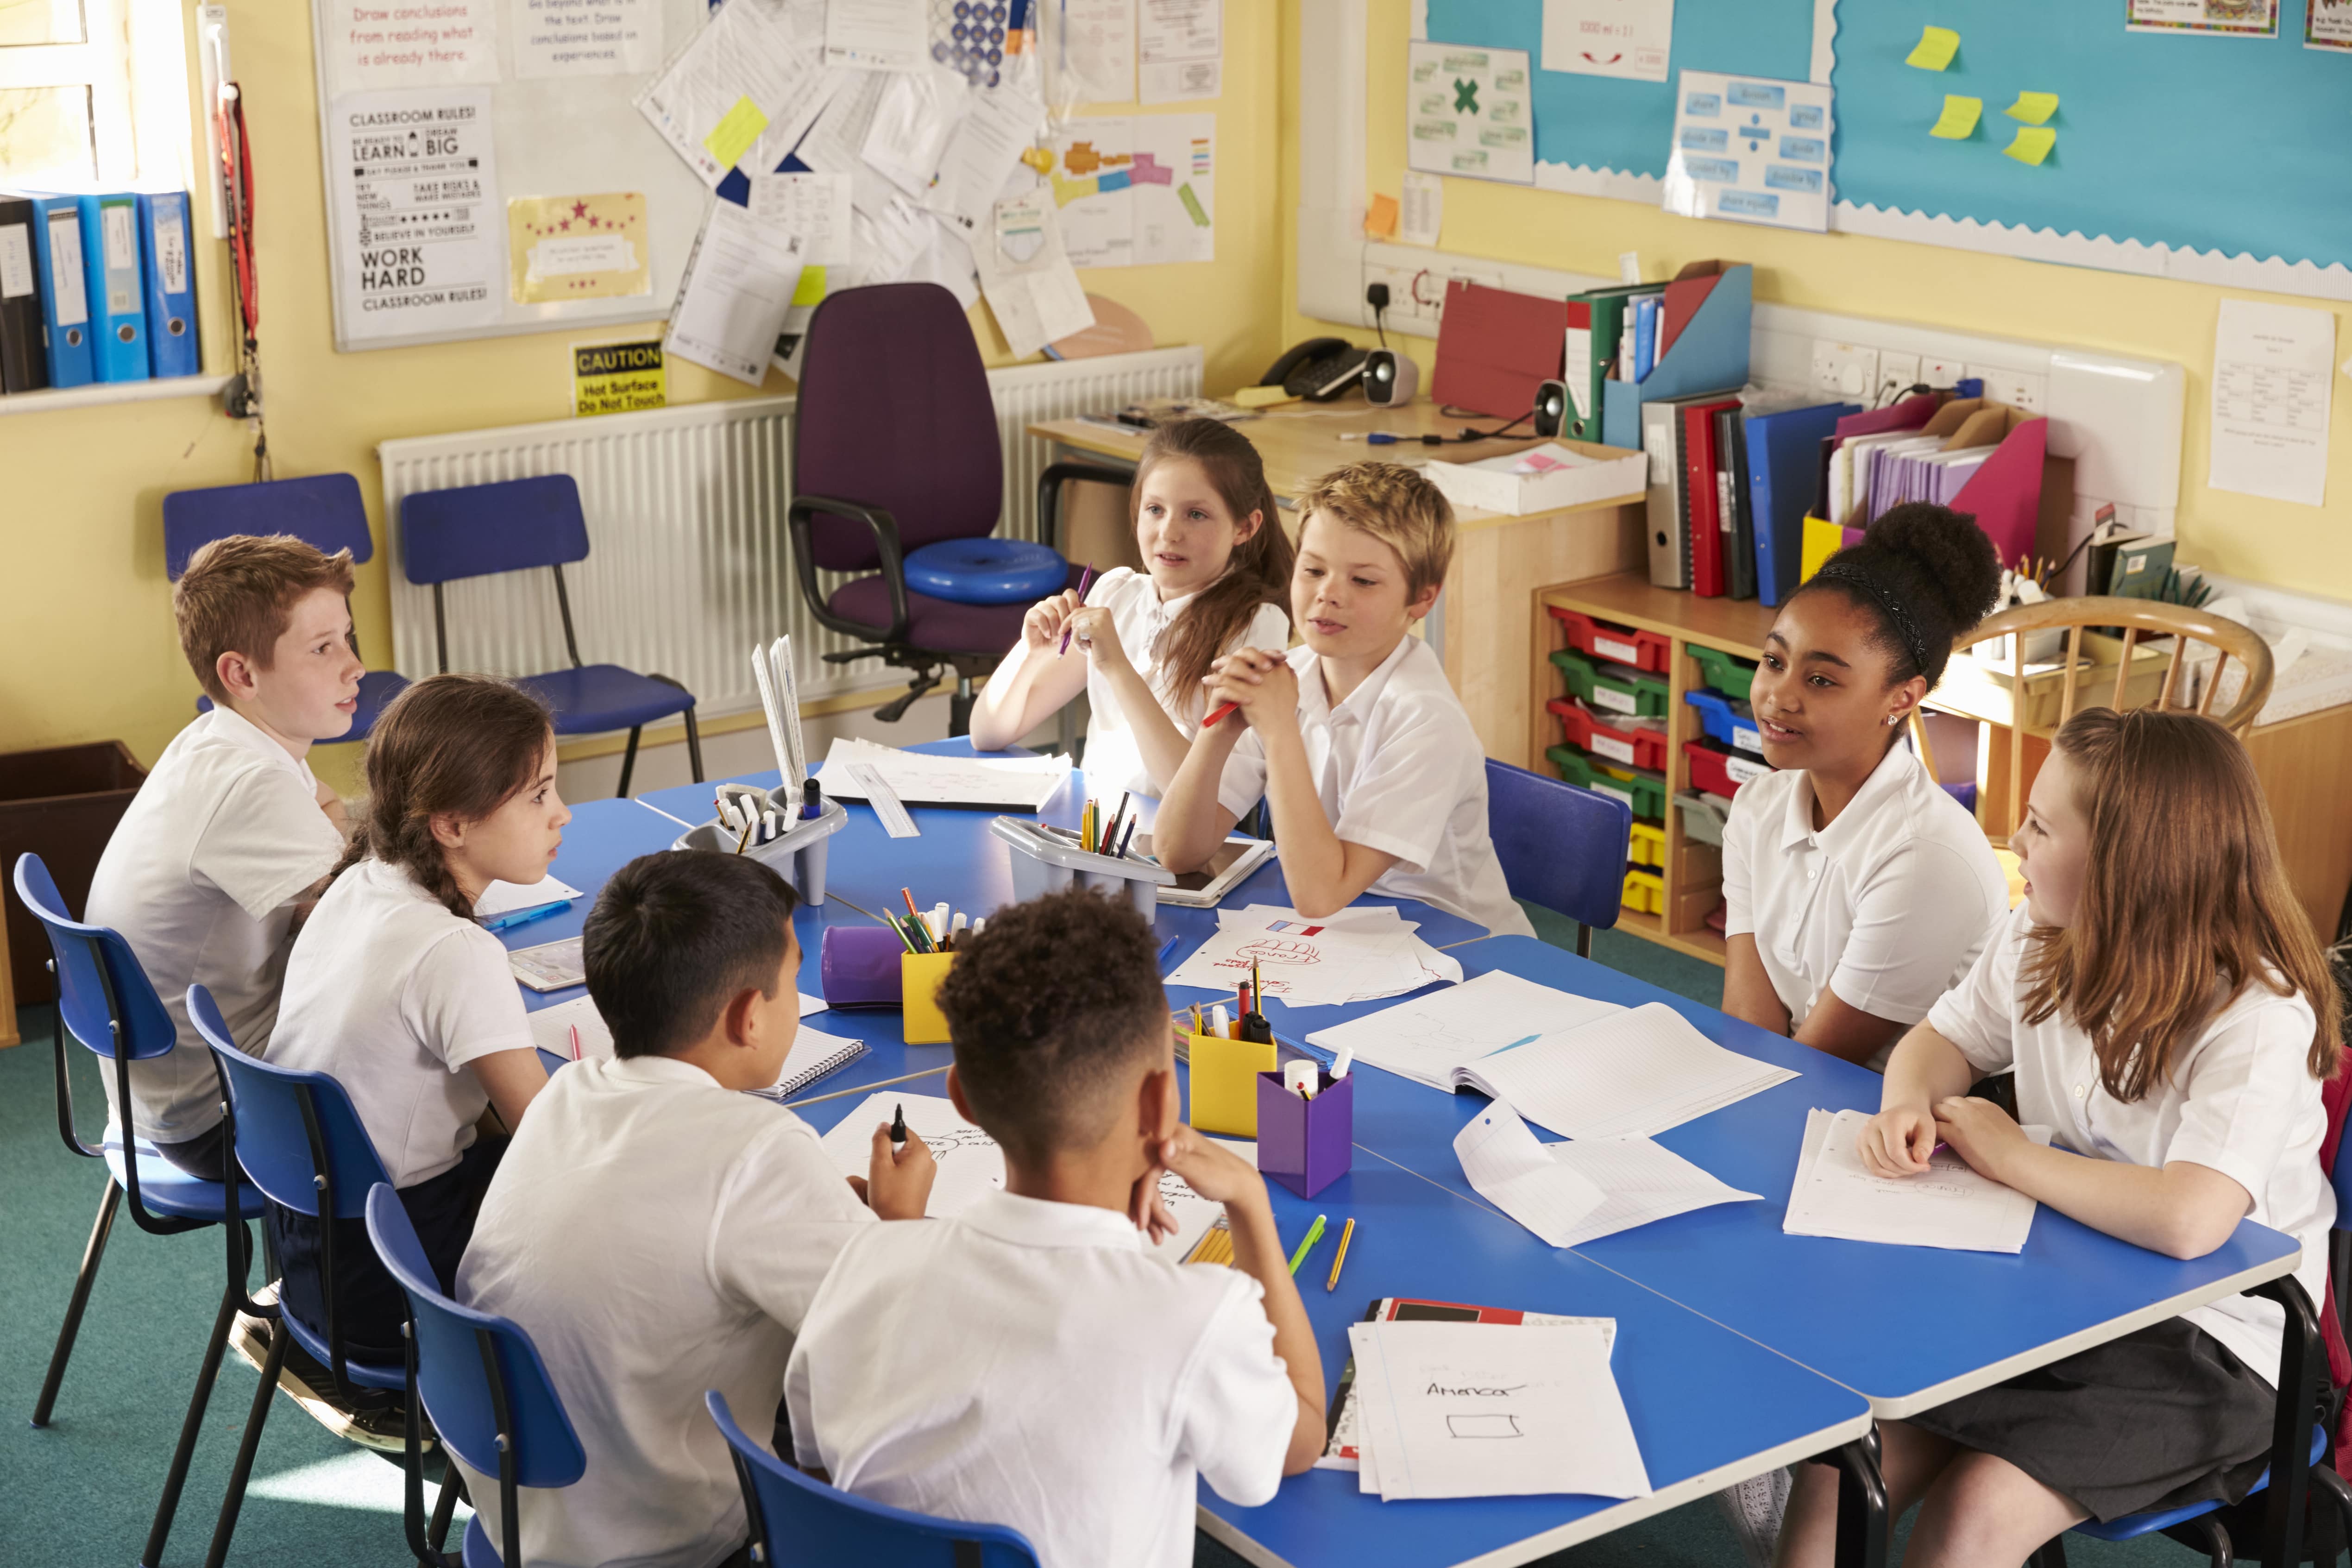 Image of pupils sitting round the table in the classroom discussing ideas.